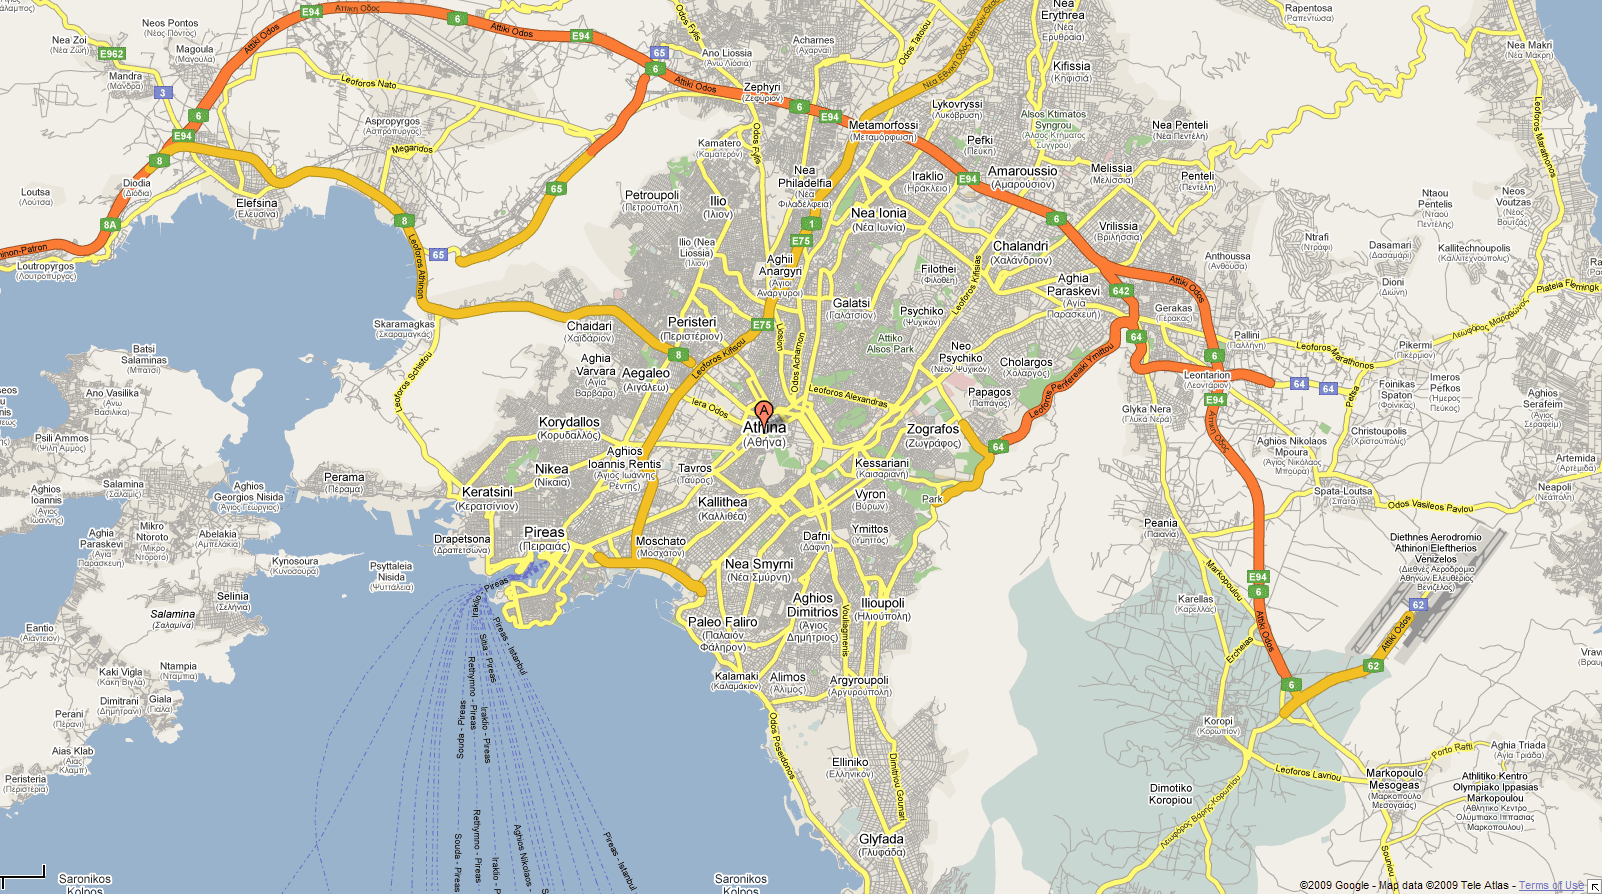 Map of Athens, Greece - City and location maps of Athens